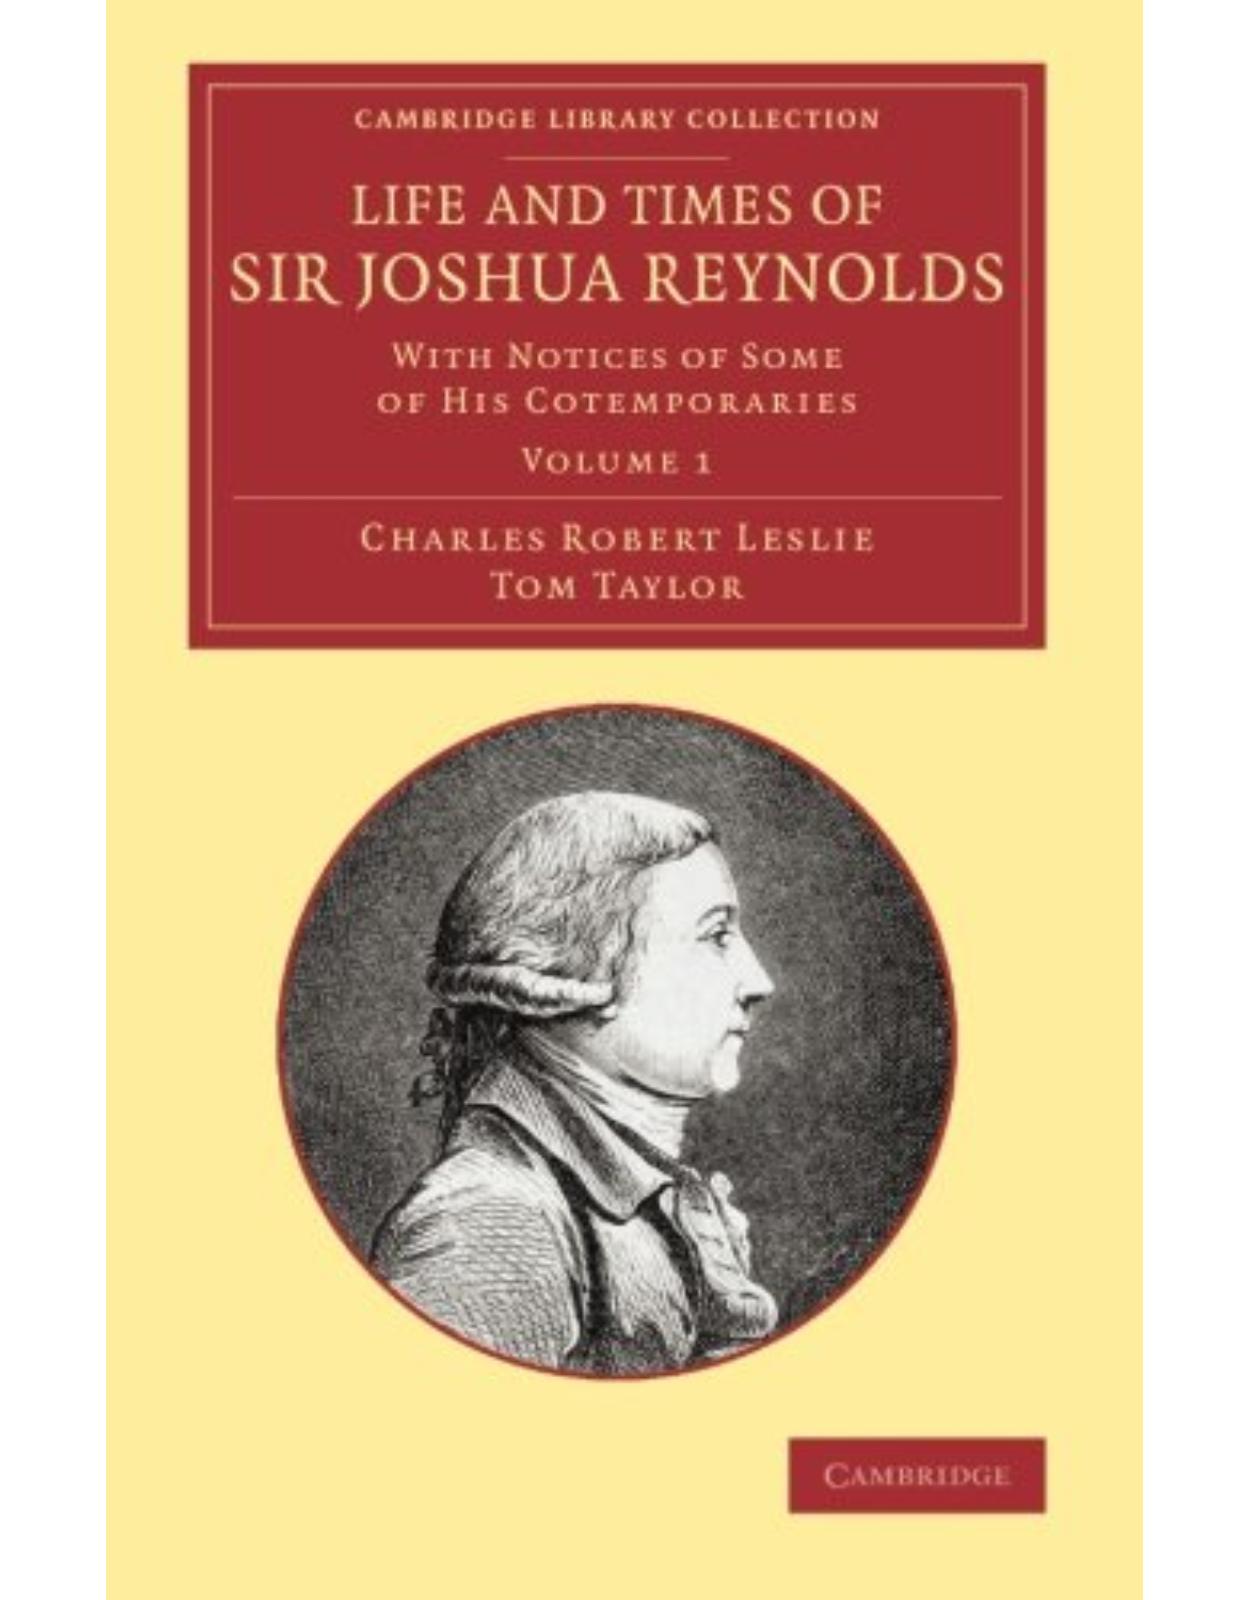 Life and Times of Sir Joshua Reynolds: Volume 1: With Notices of Some of his Cotemporaries (Cambridge Library Collection - Art and Architecture)